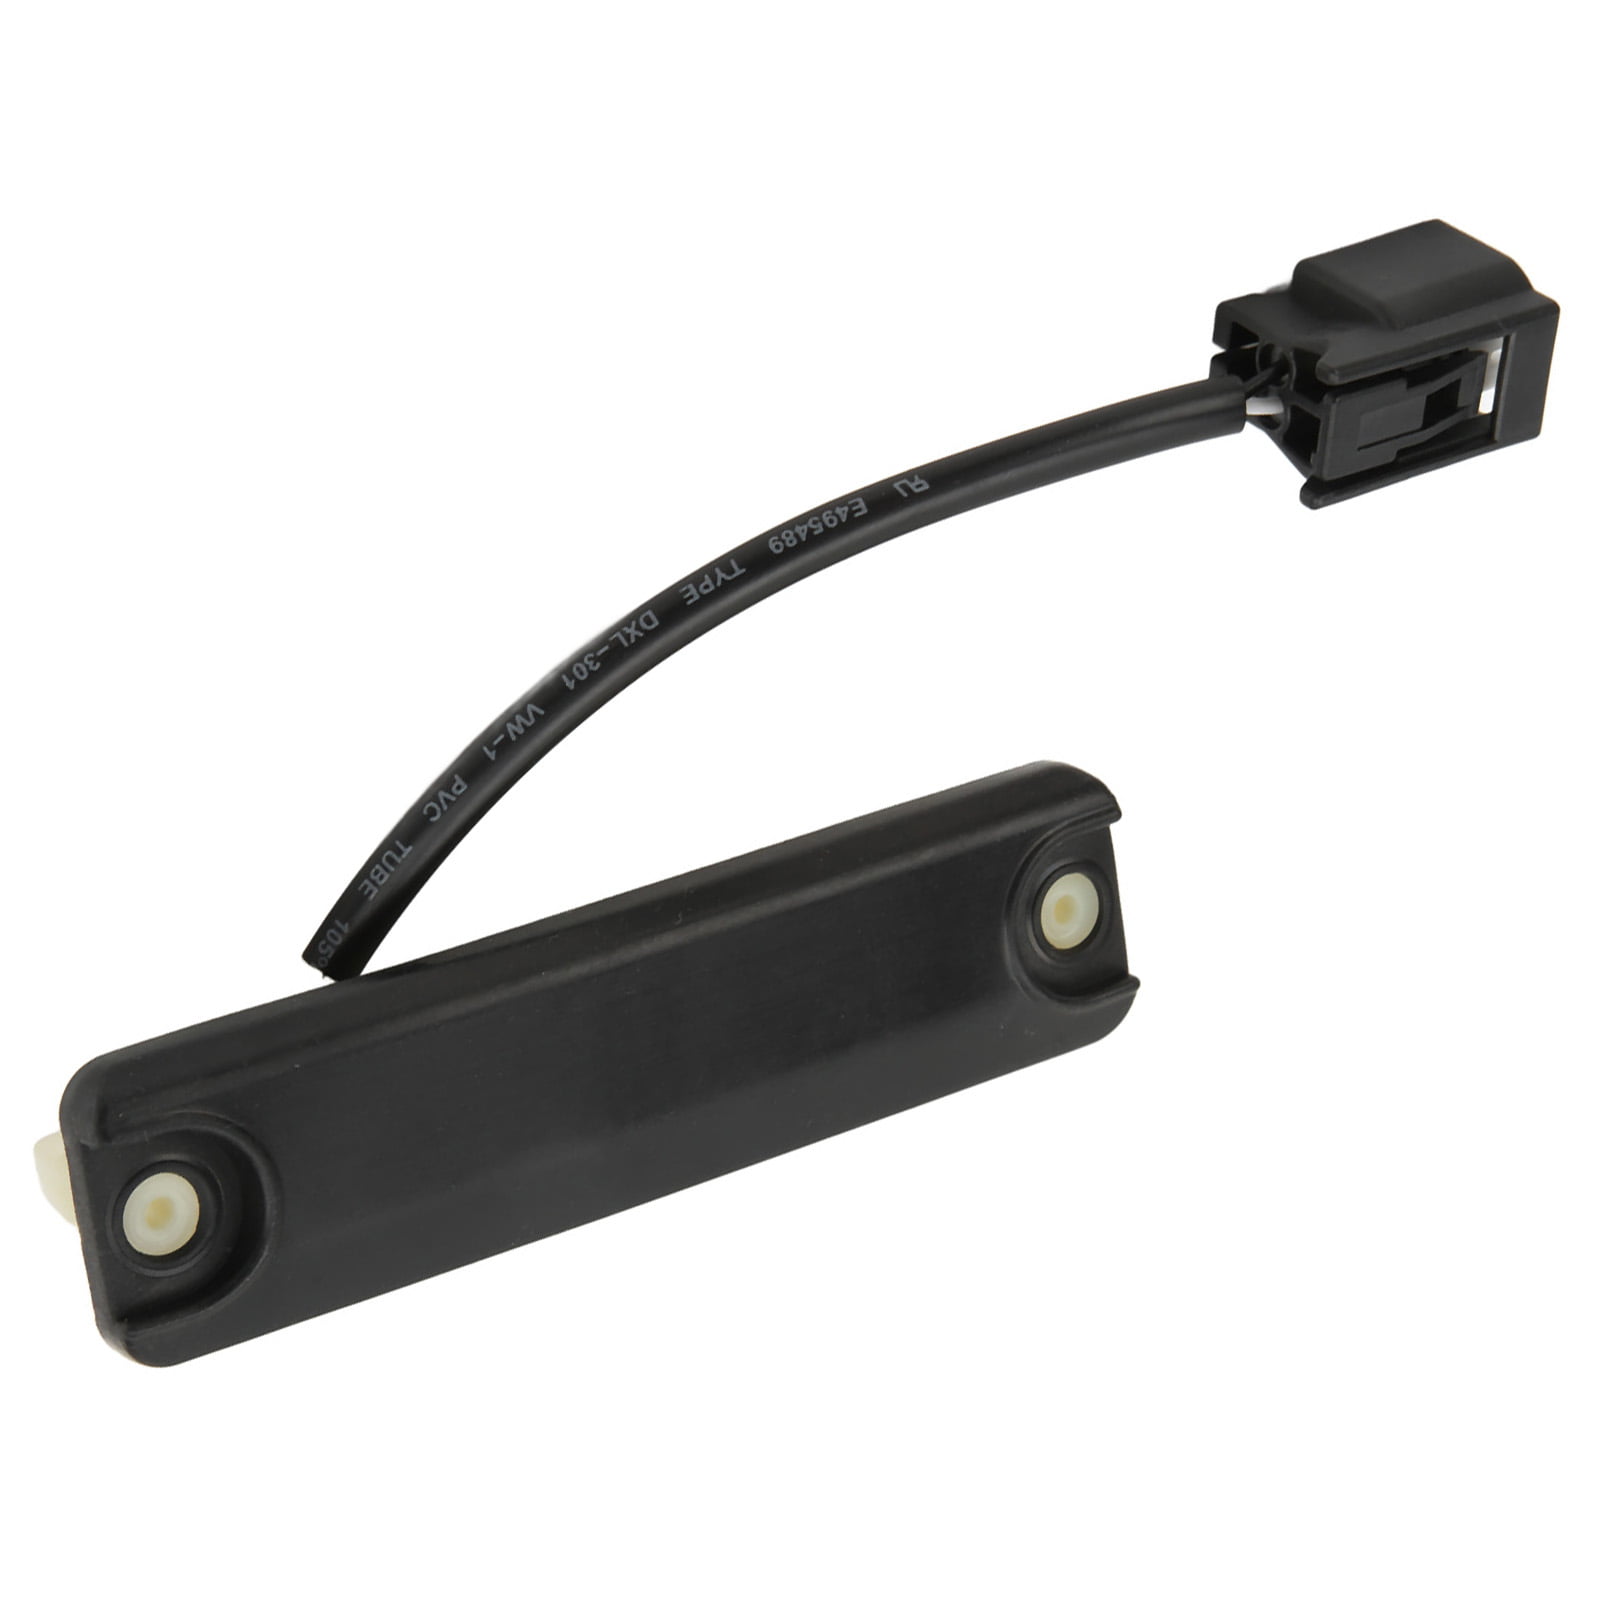 Tailgate Opening Release Switch 84840‑35010 Plug and Play Replacement for 4RUNNER 2003‑2020 Liftgate Release Switch